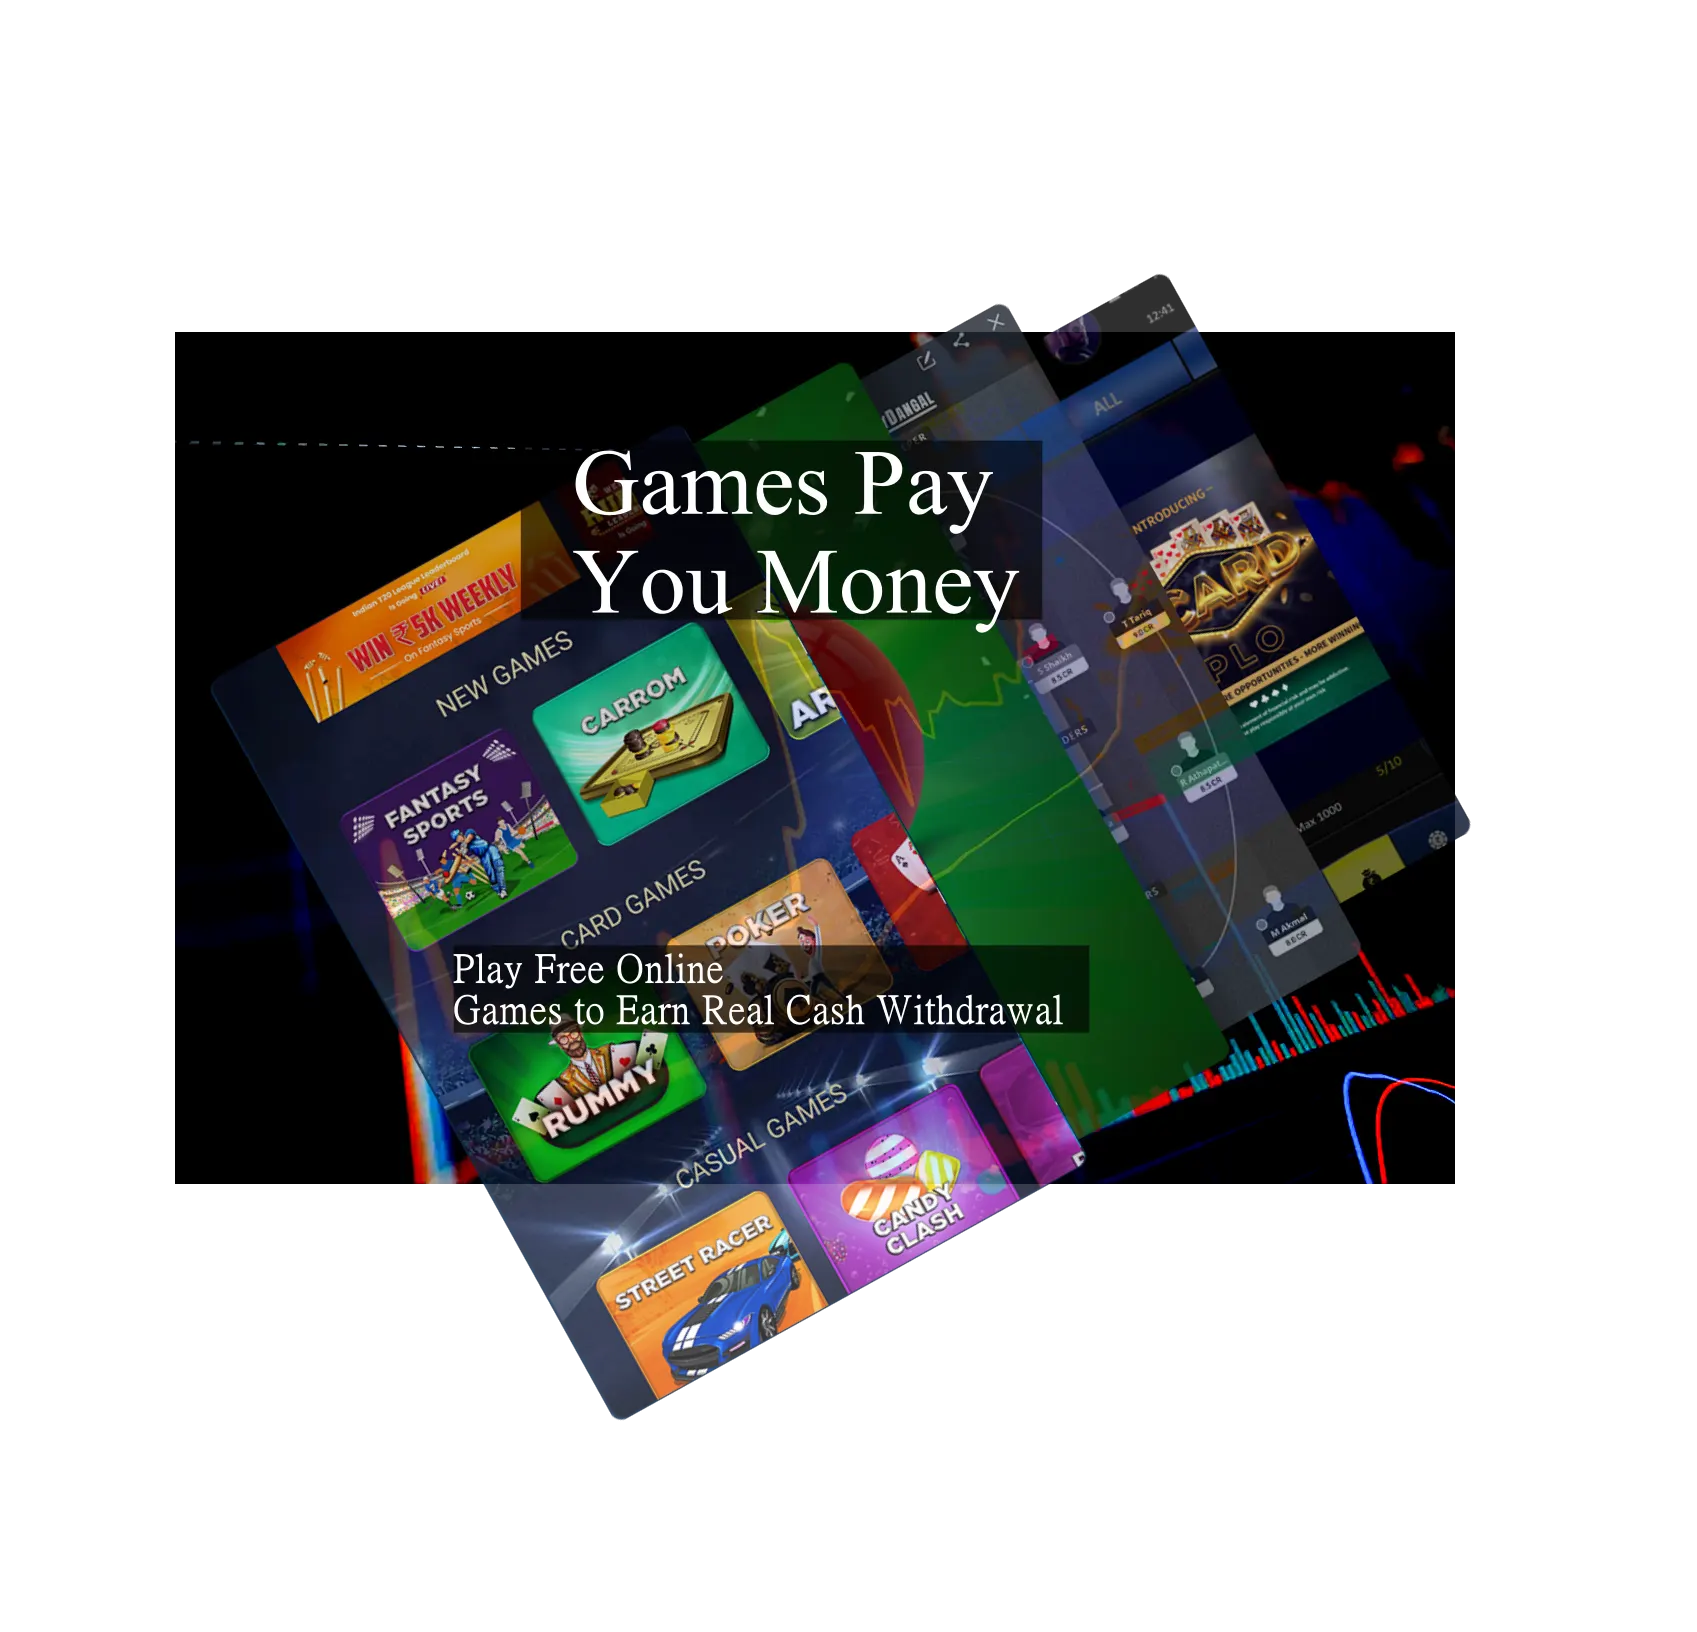 Play Free Online Games to Earn Real Cash Withdrawal